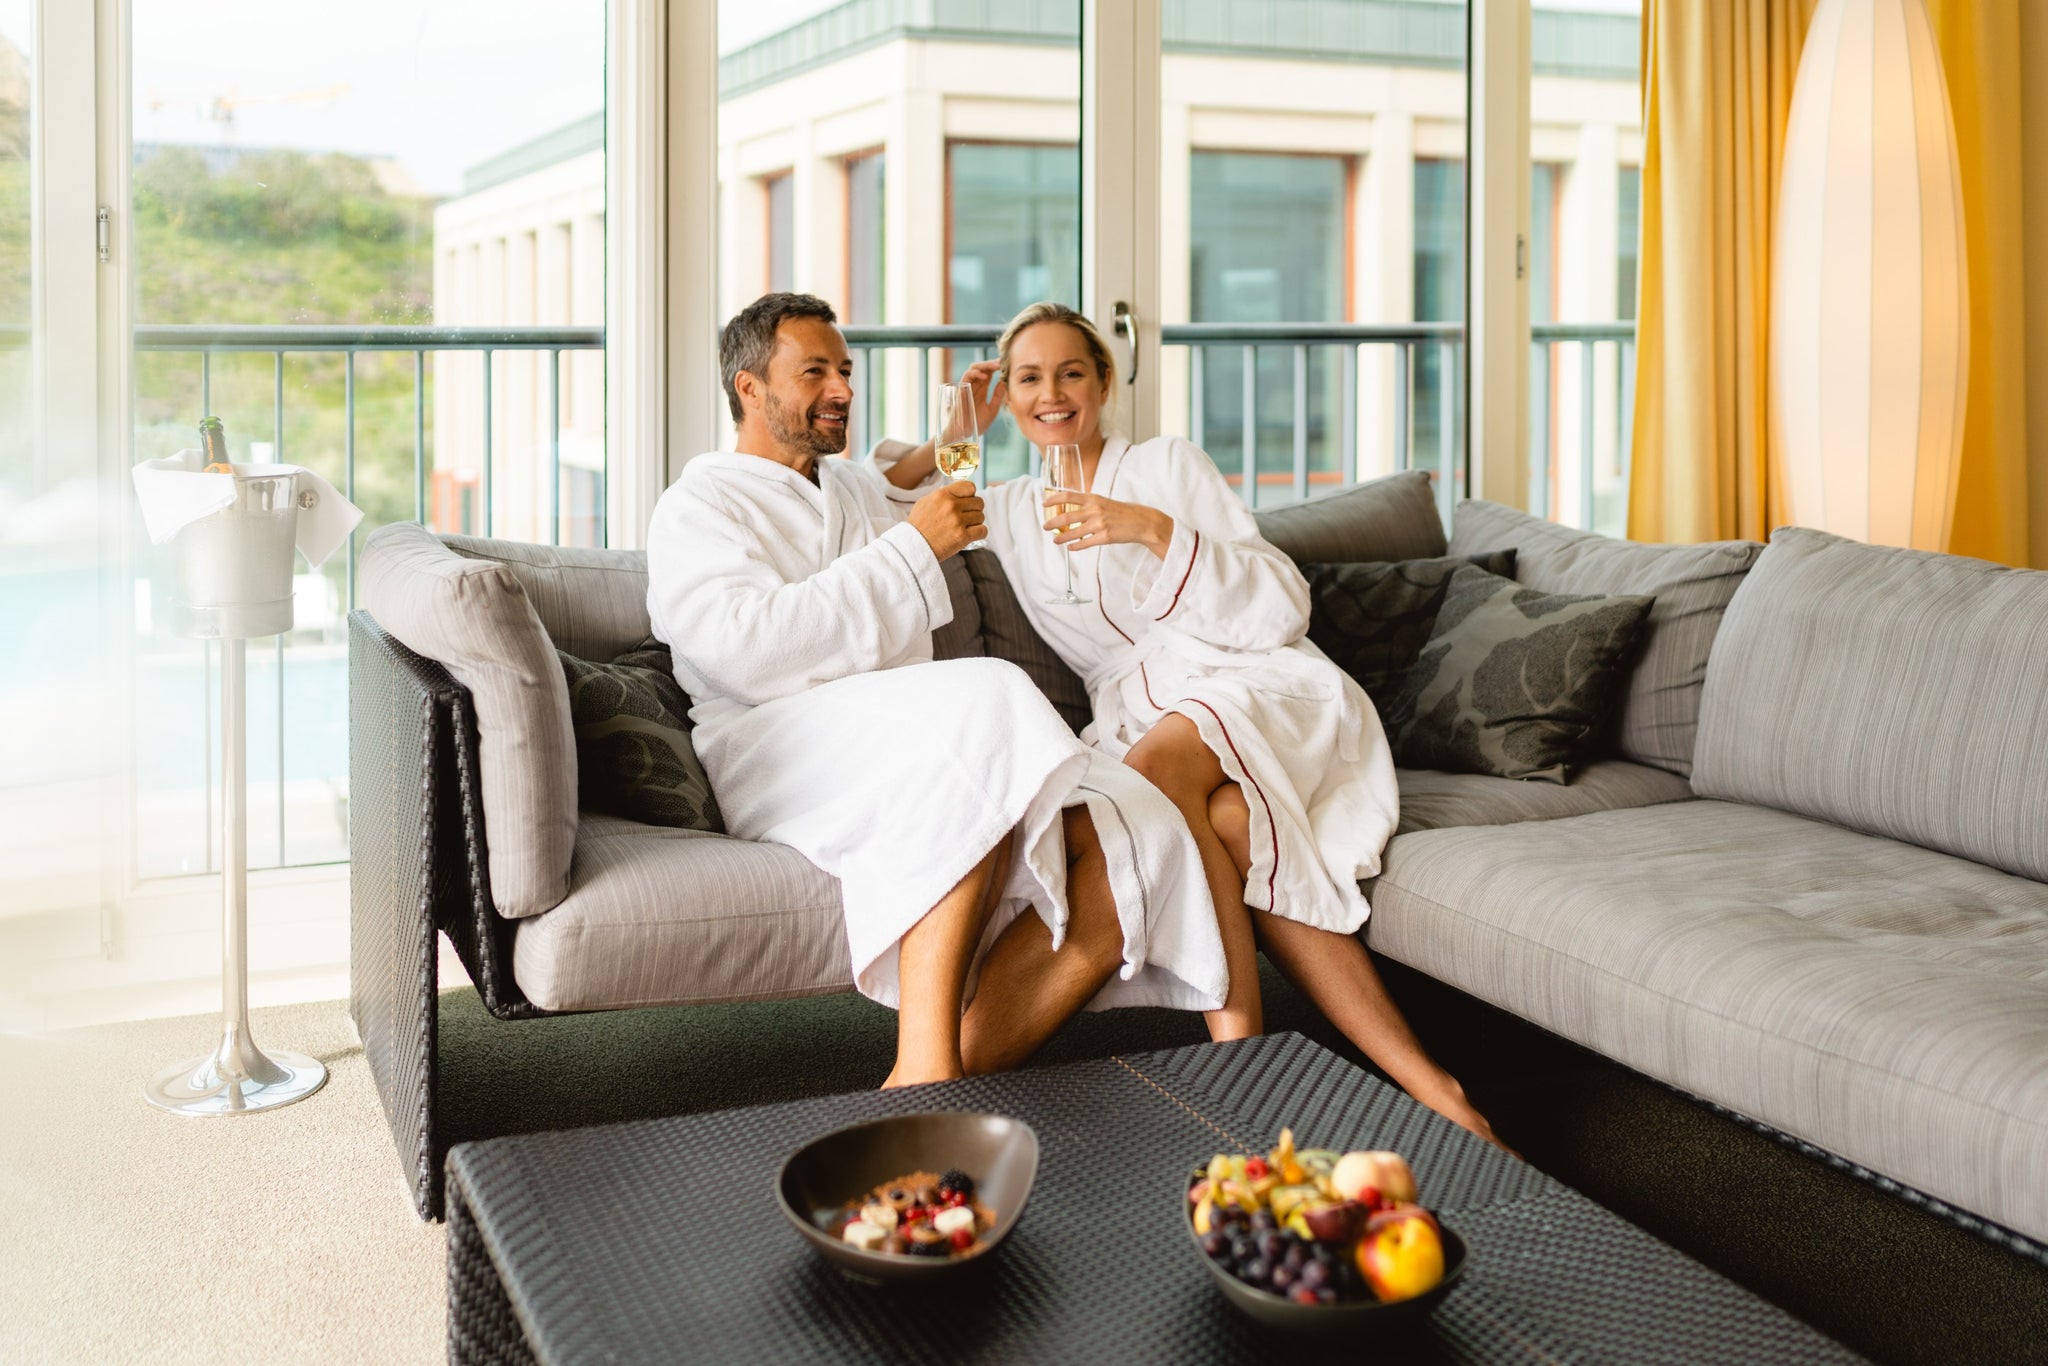 Couple enjoying their stay at the A-ROSA Sylt Spa in Germany